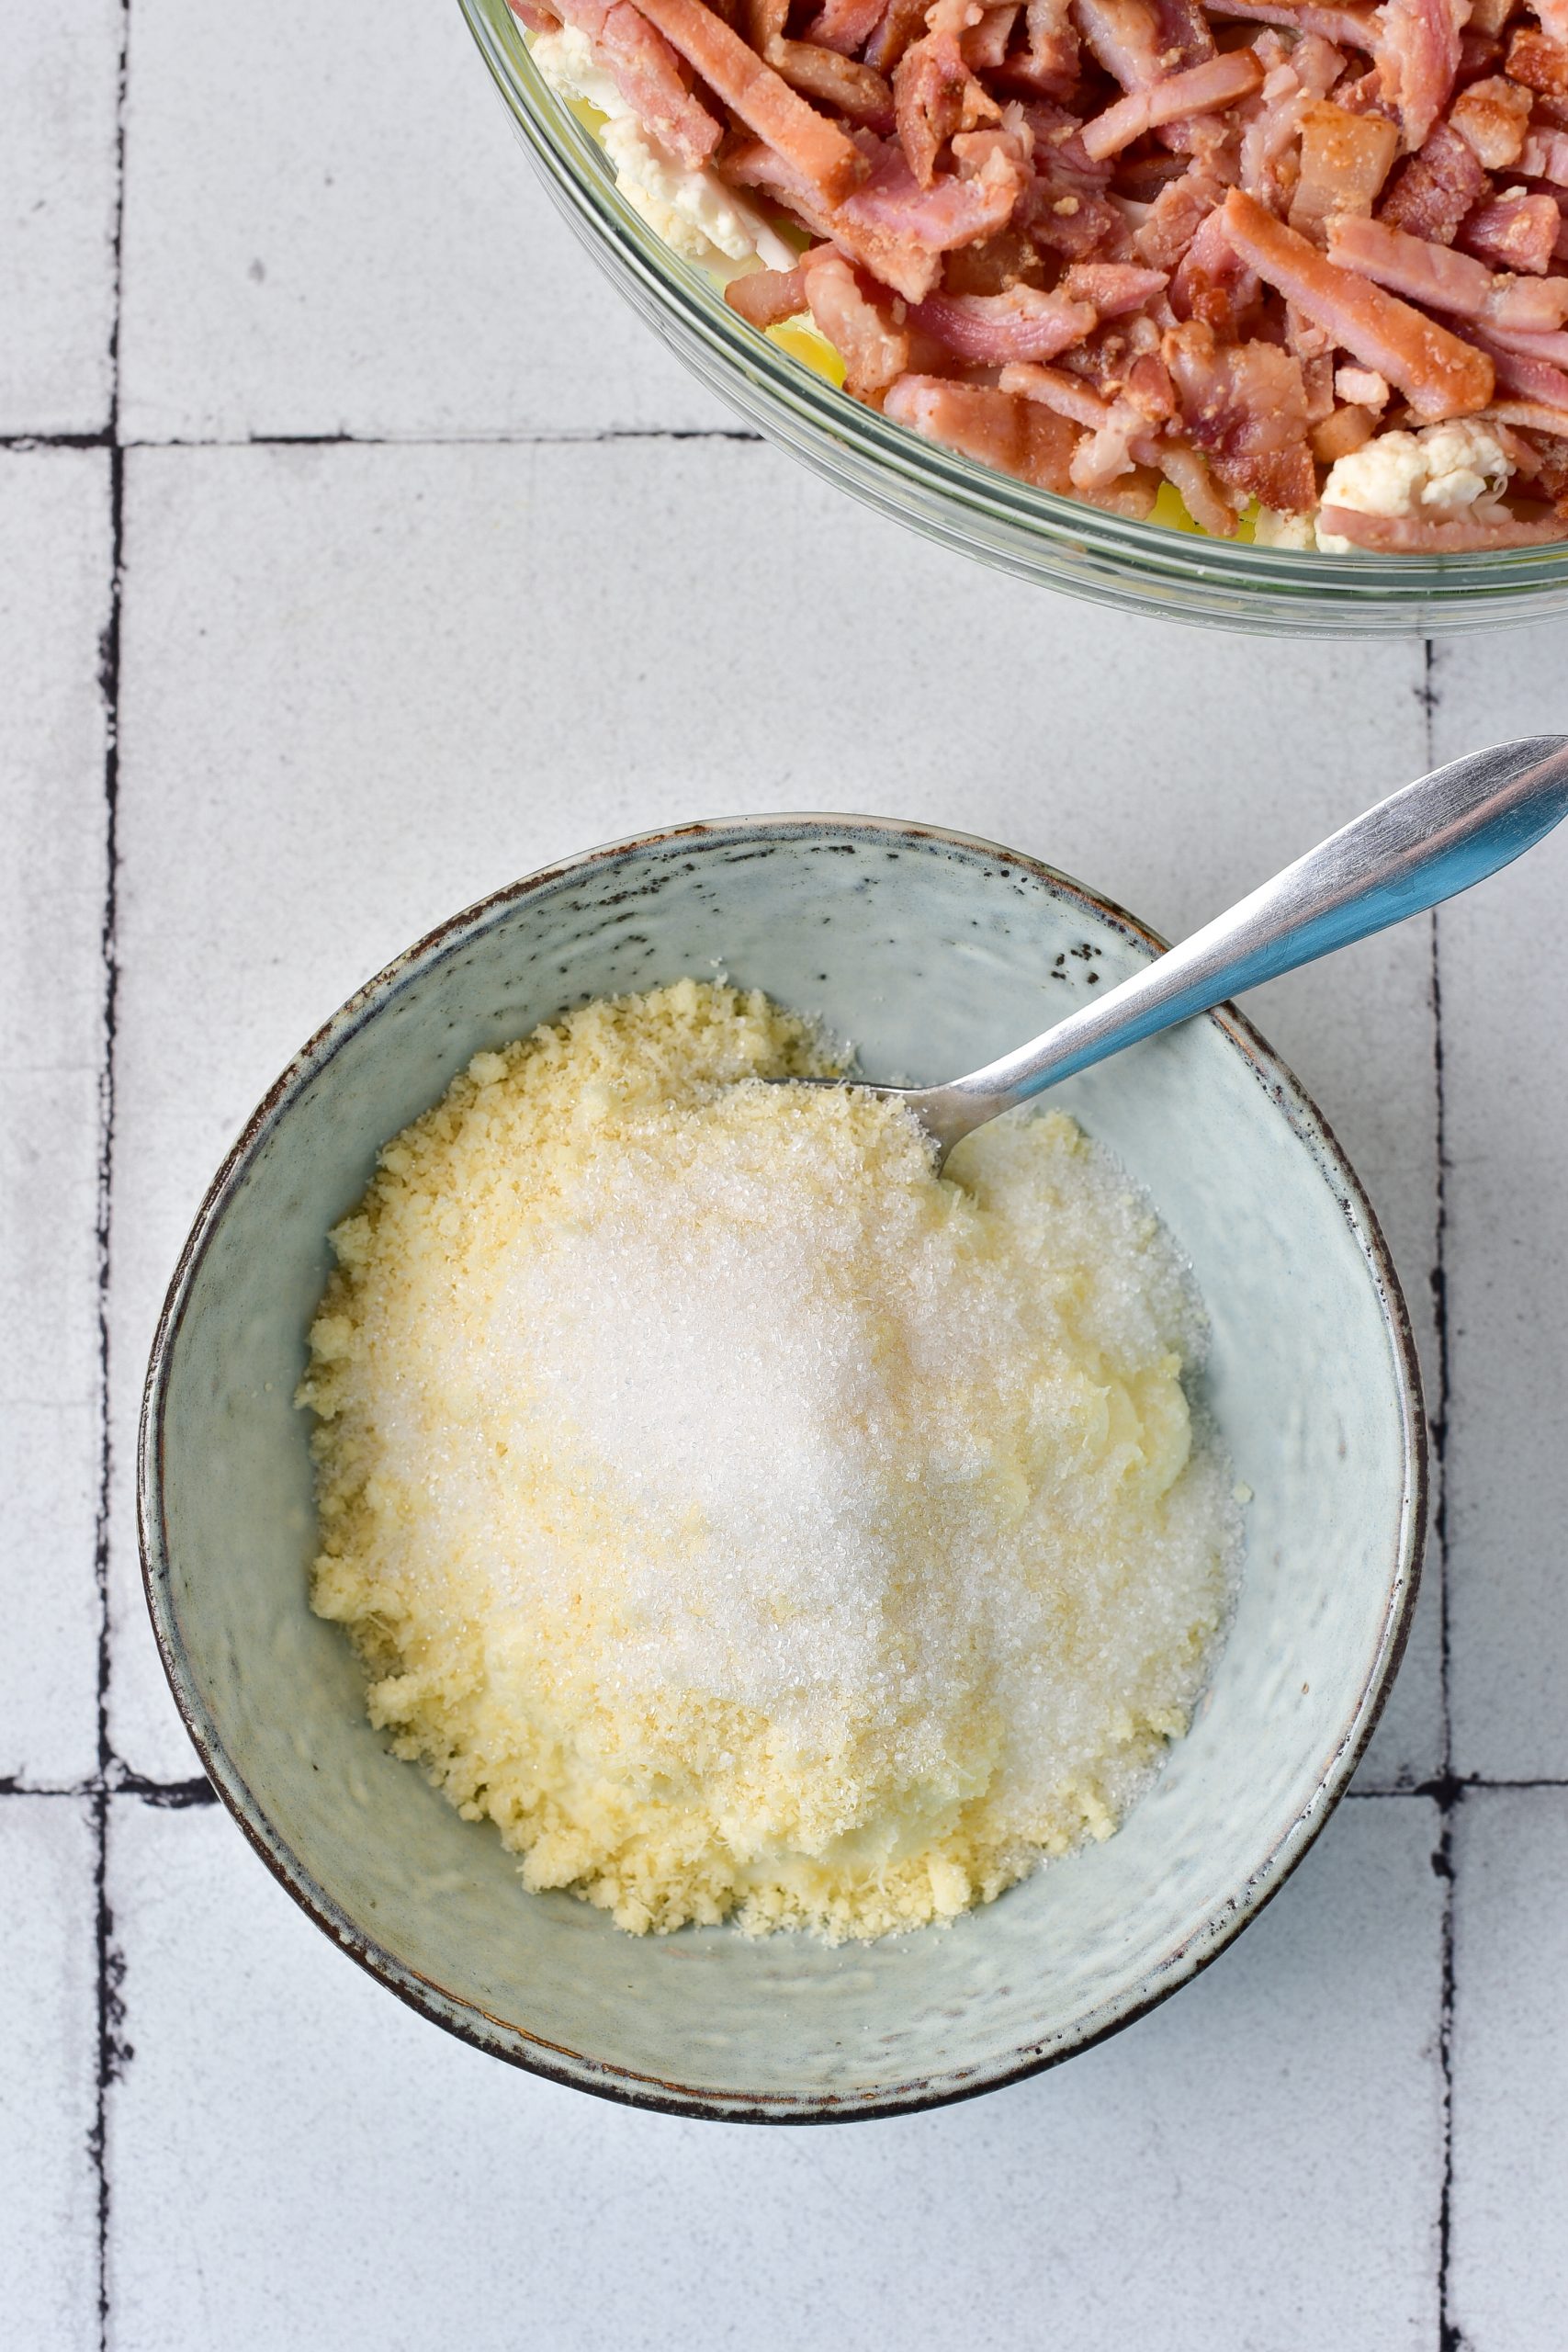 In a bowl, whisk together the mayonnaise, sugar, and parmesan cheese.